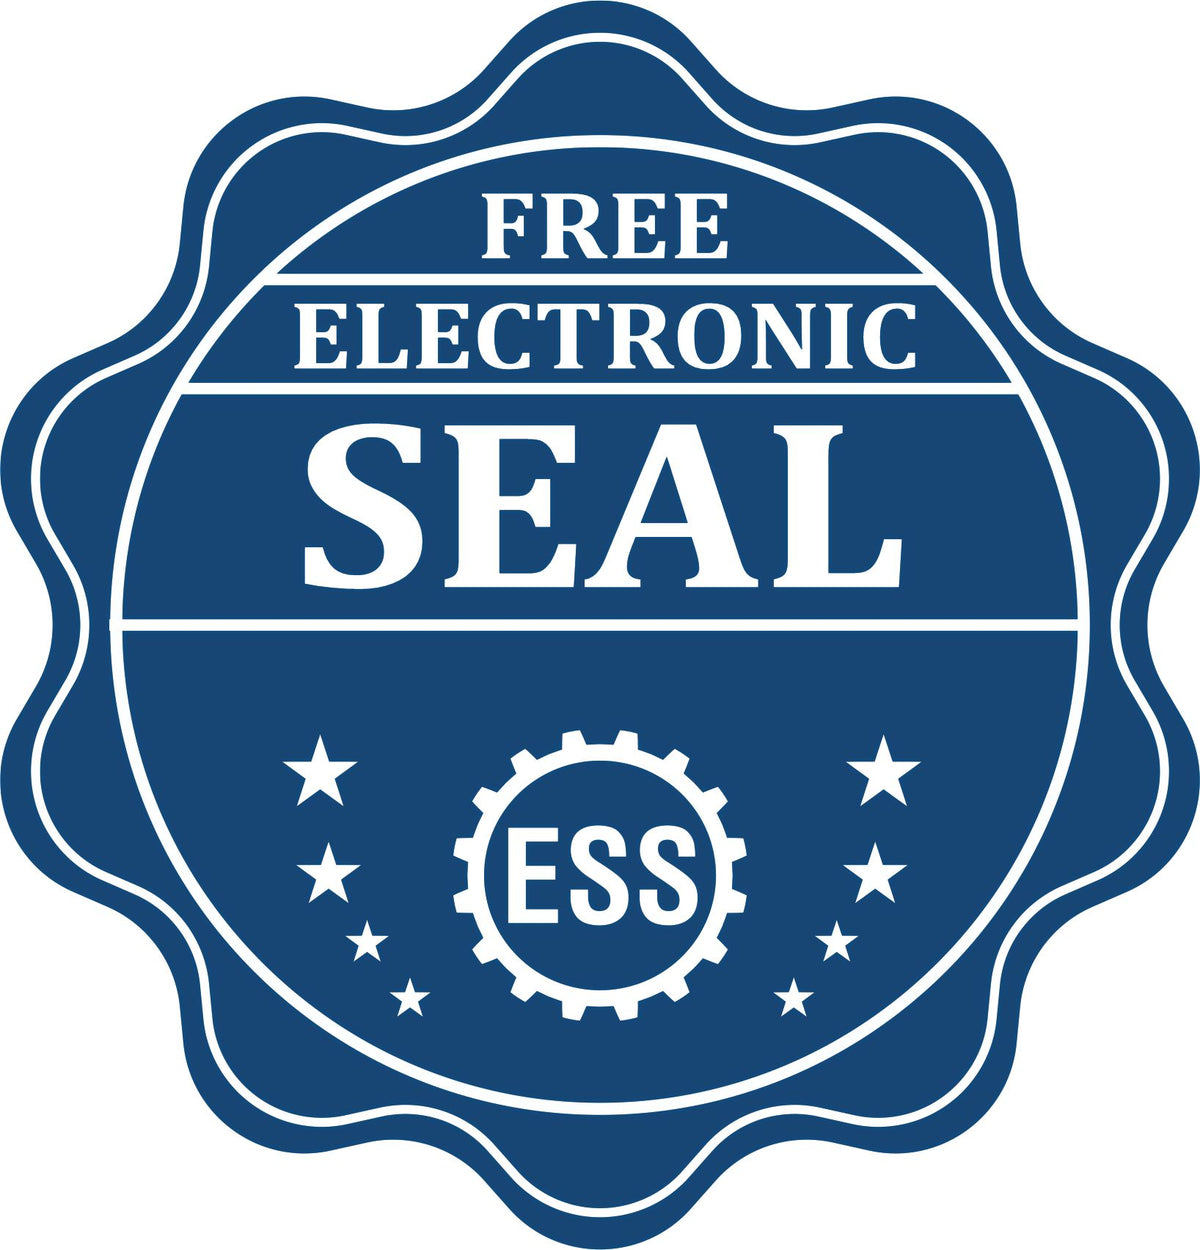 A badge showing a free electronic seal for the Long Reach Louisiana Geology Seal with stars and the ESS gear on the emblem.